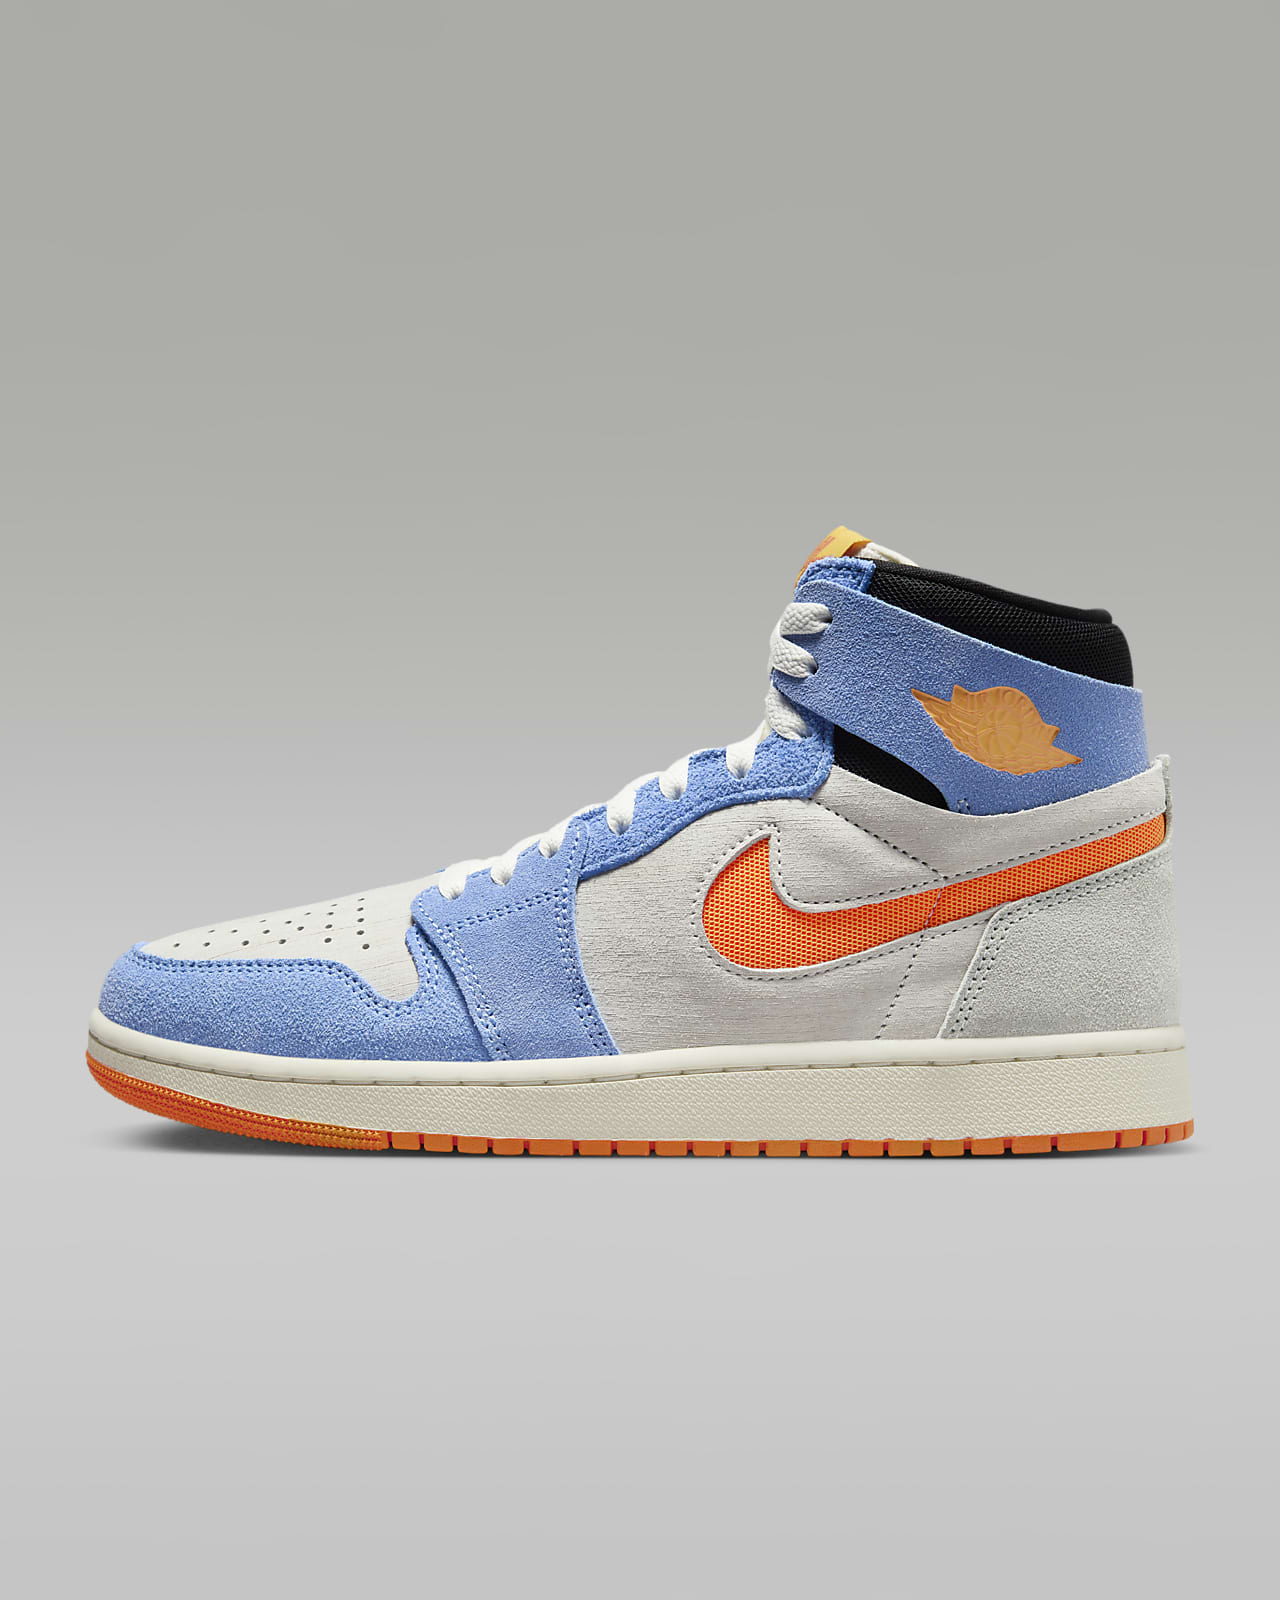 Elevate Your Sneaker Game with Air Jordan 1 Zoom CMFT 2: The Epitome of Mens Footwear Fashion!